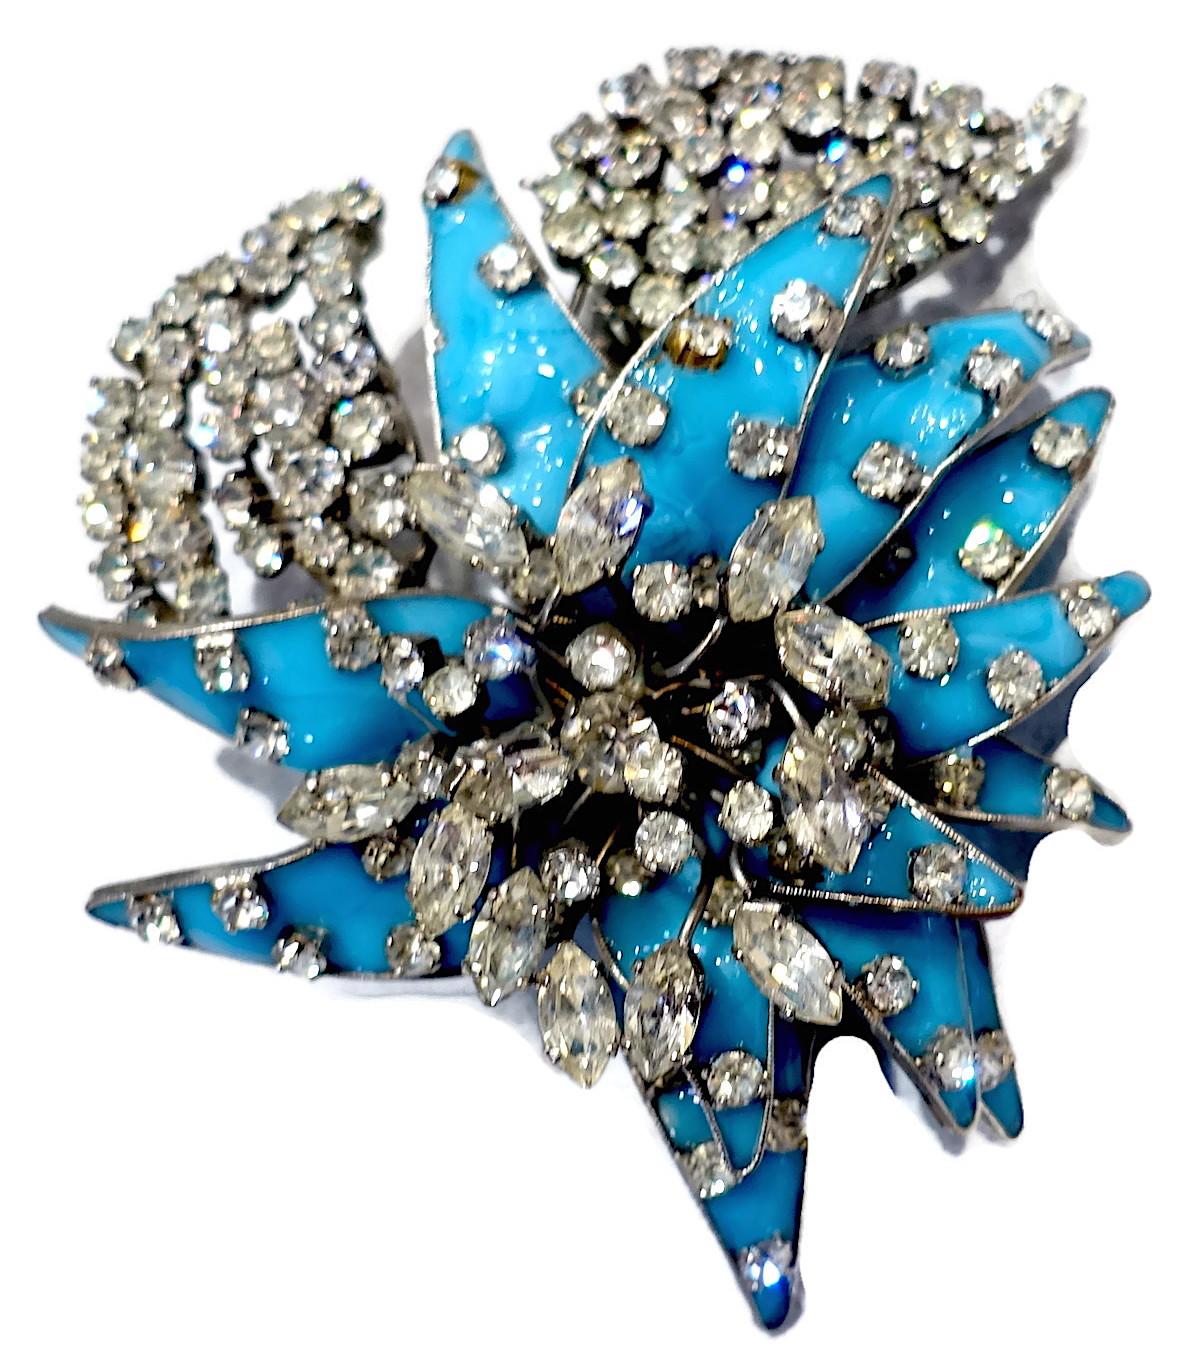 This is an outstanding vintage French fur clip designed in a 3-dimensional floral trembler with turquoise color French glass encrusted with beautiful clear crystals in a silver tone setting.  This fur clip measures 3” x 2-1/2” and is signed